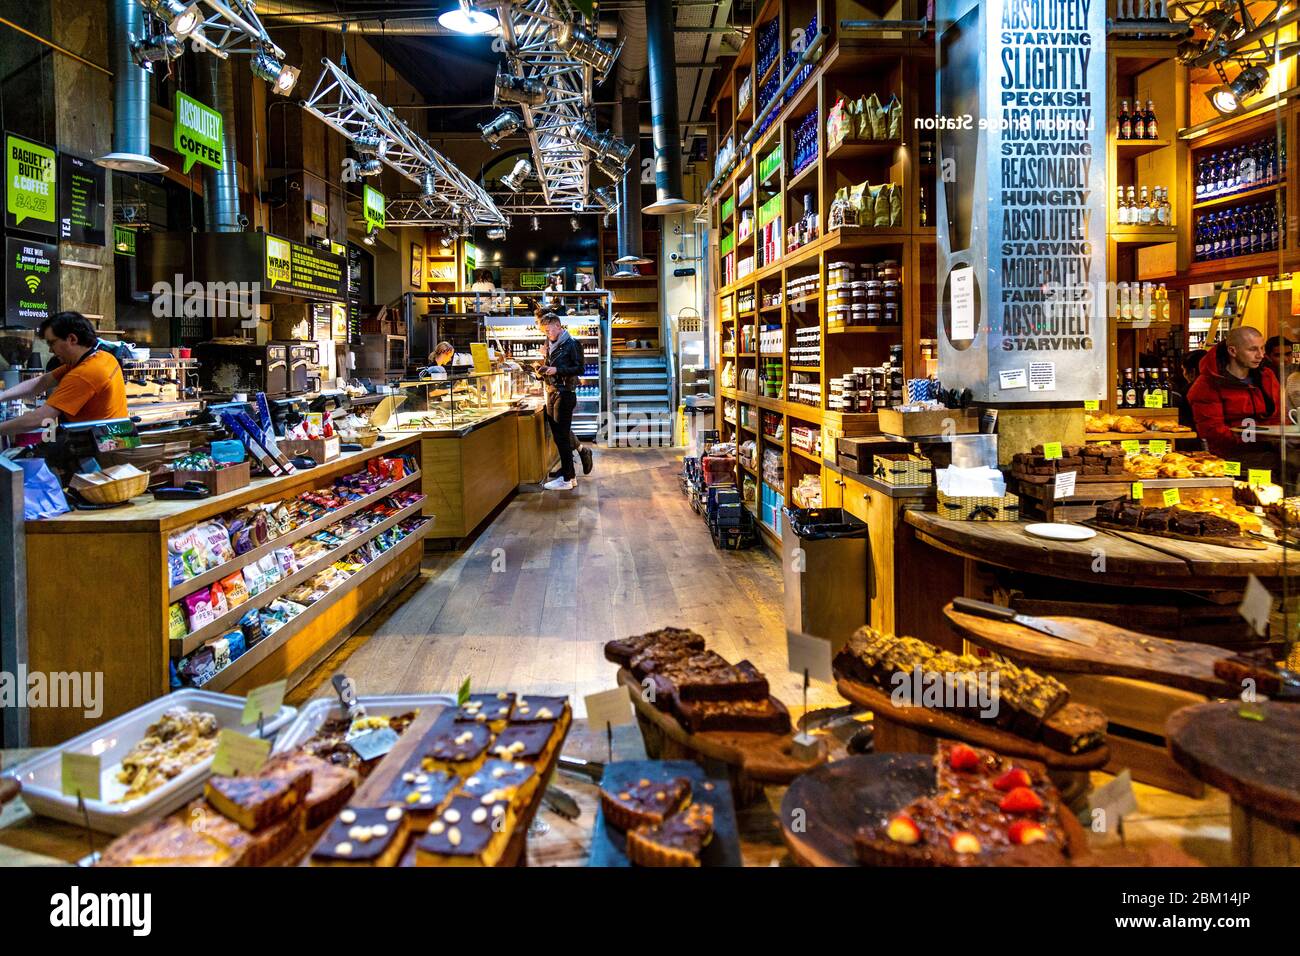 Interior of Absolutely Starving deli, cafe and grocery store, London, UK Stock Photo